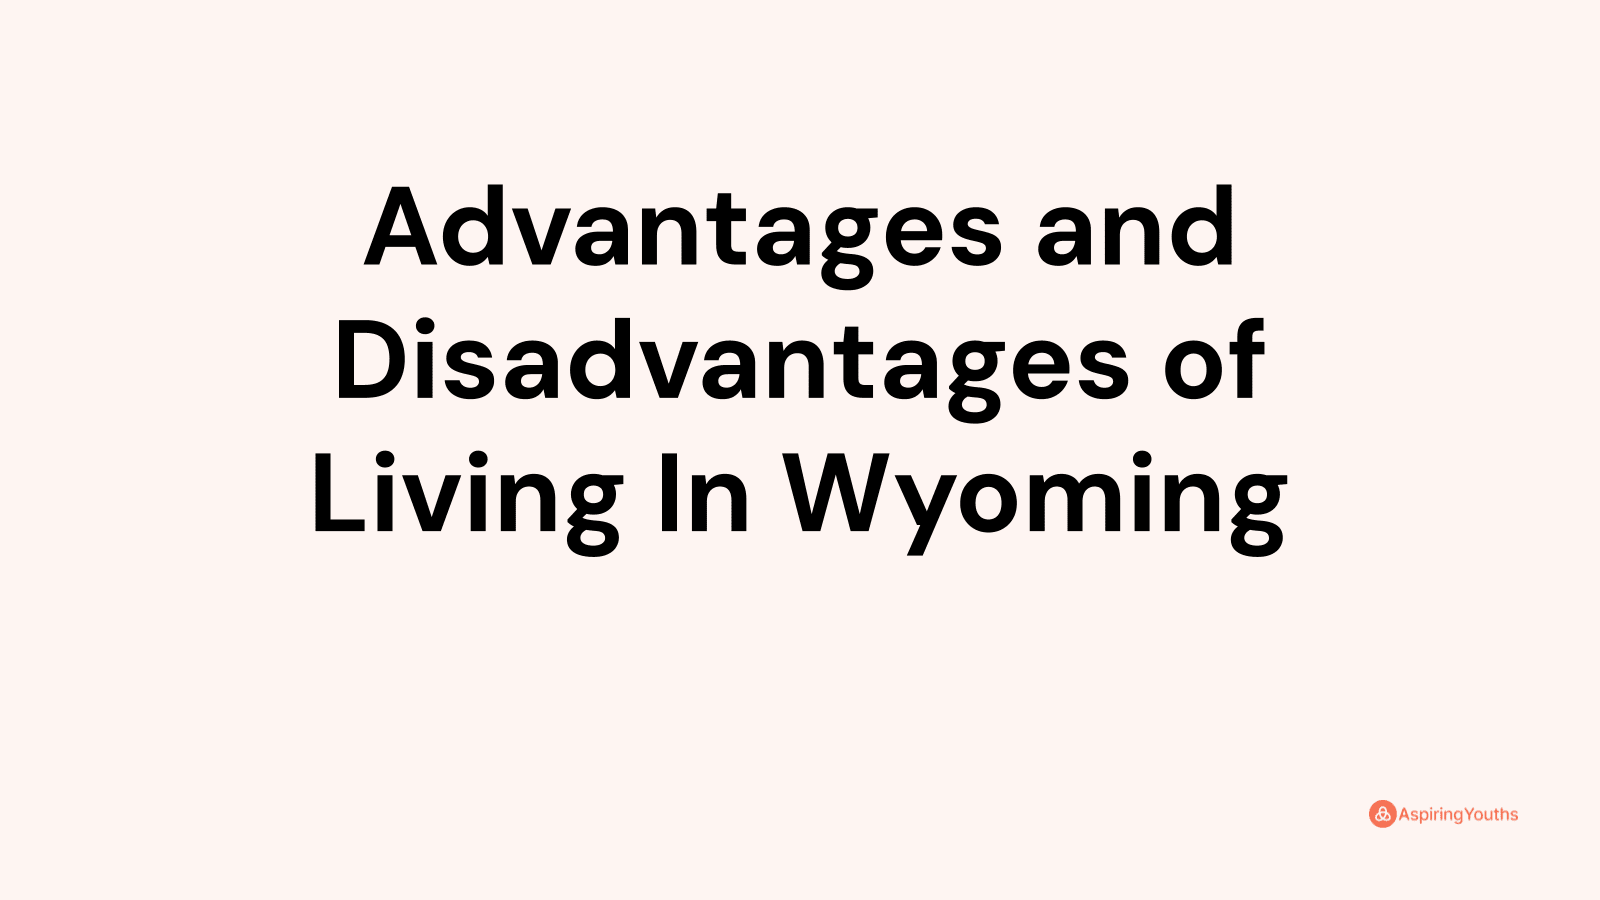 Advantages and disadvantages of Living In Wyoming